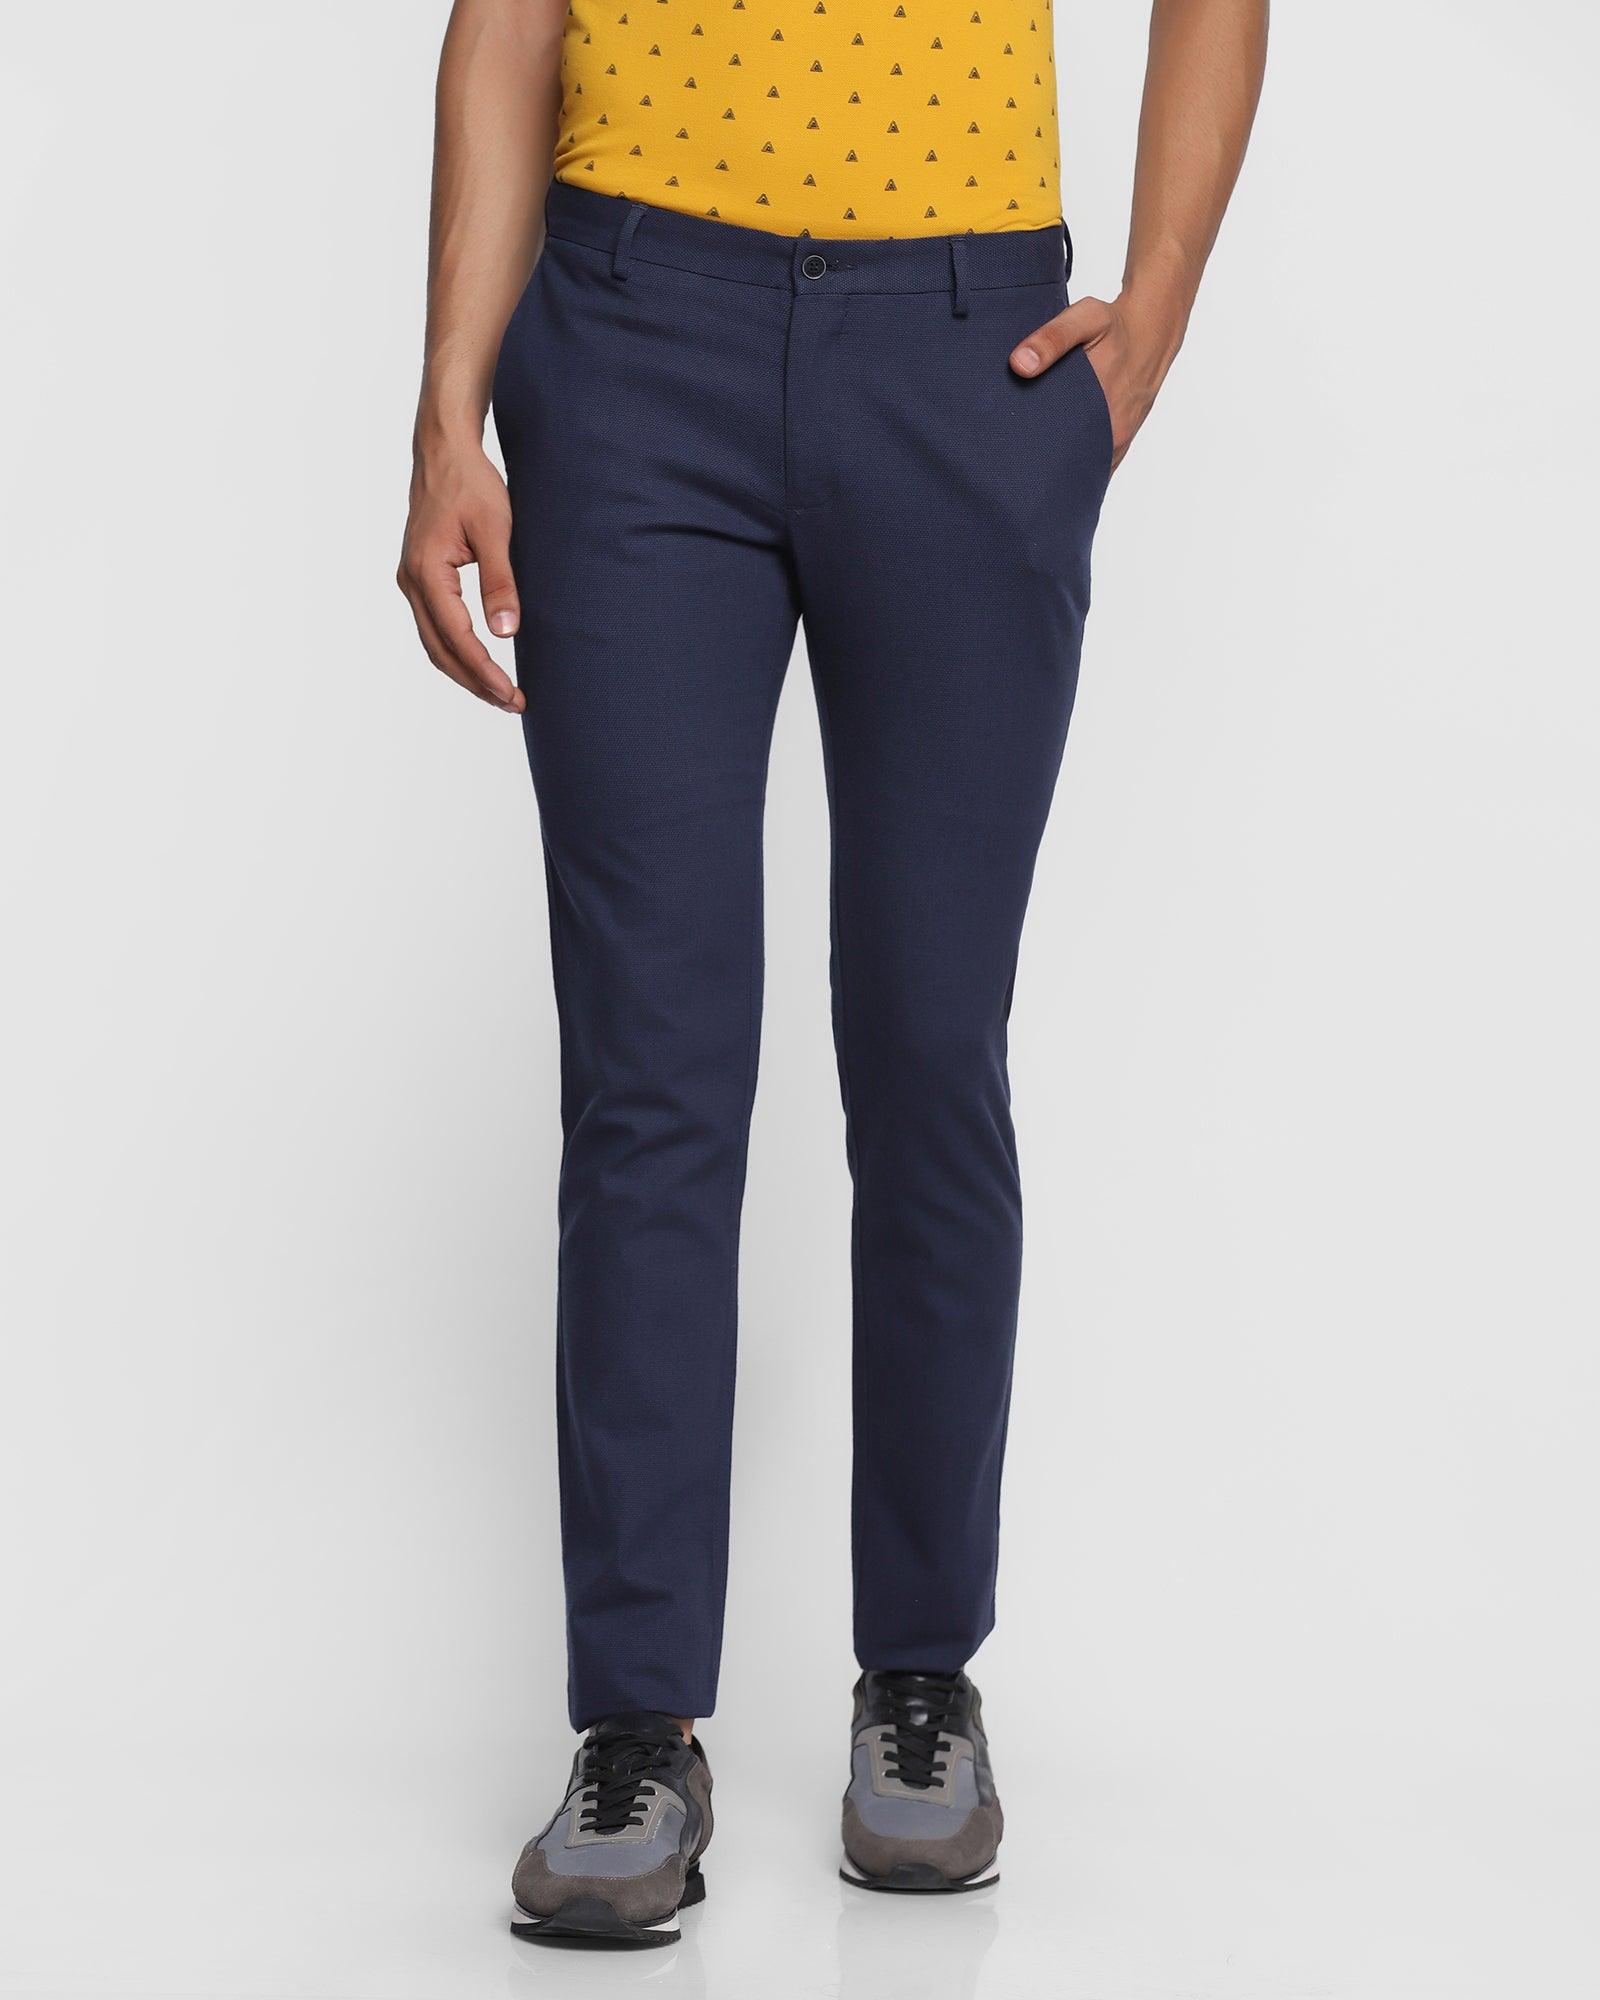 Slim Fit B-91 Casual Navy Solid Khakis - Canopus